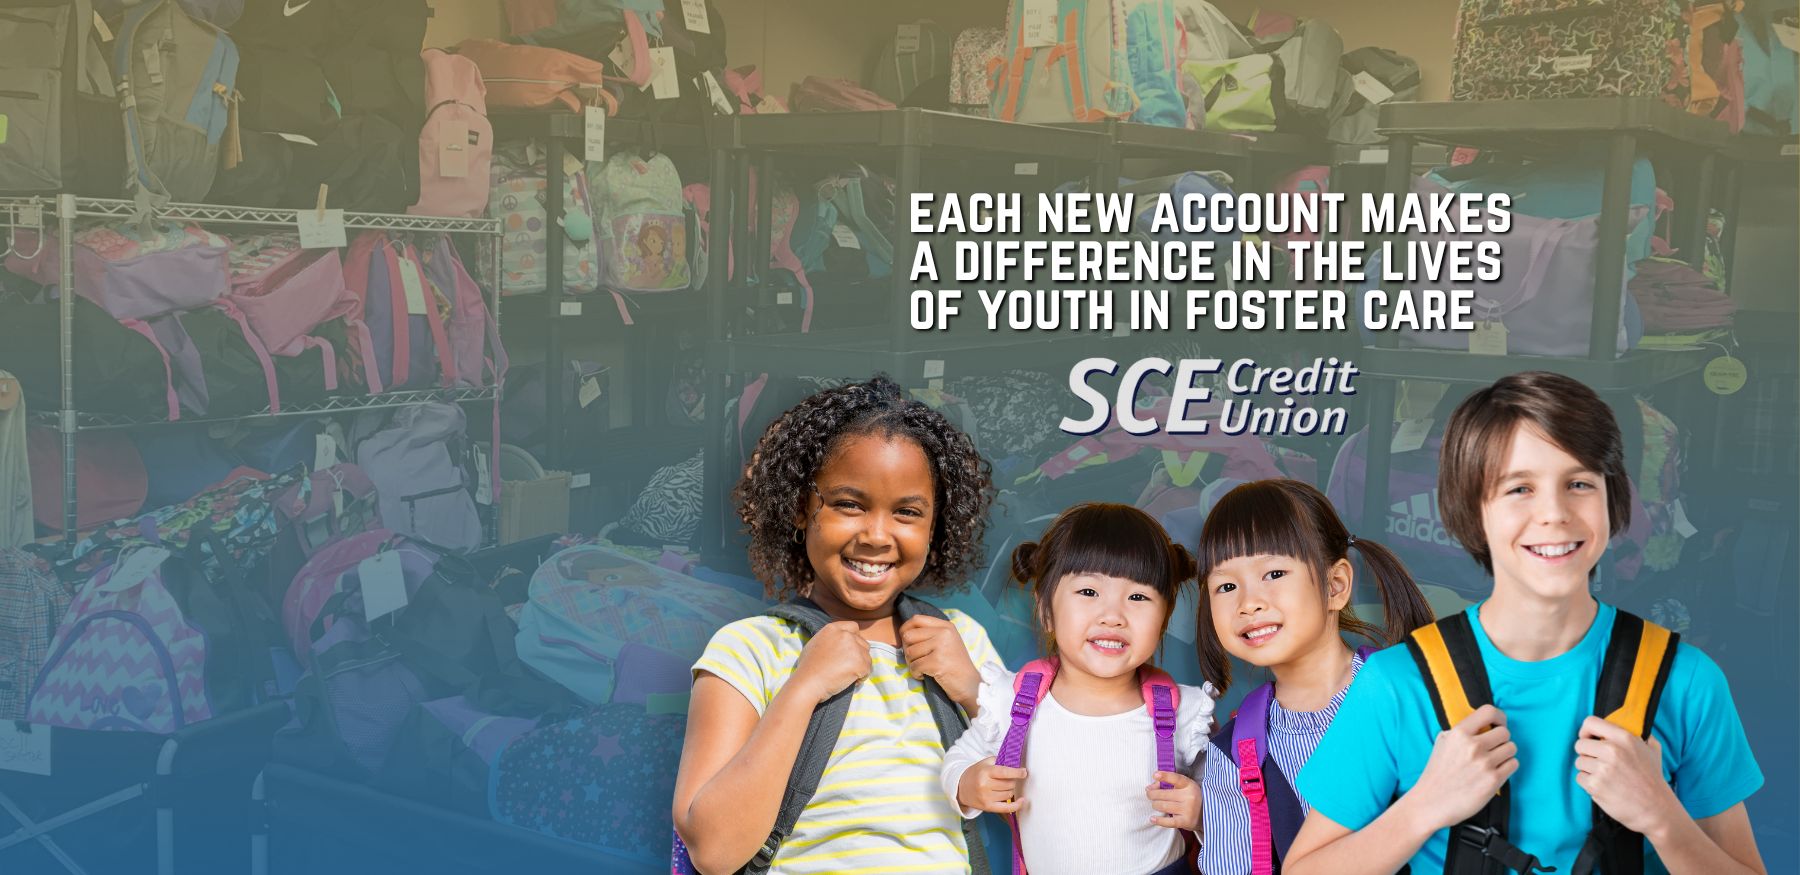 Each new account makes a difference in the lives of youth in foster care | SCE Credit Union Partnership with Comfort Cases